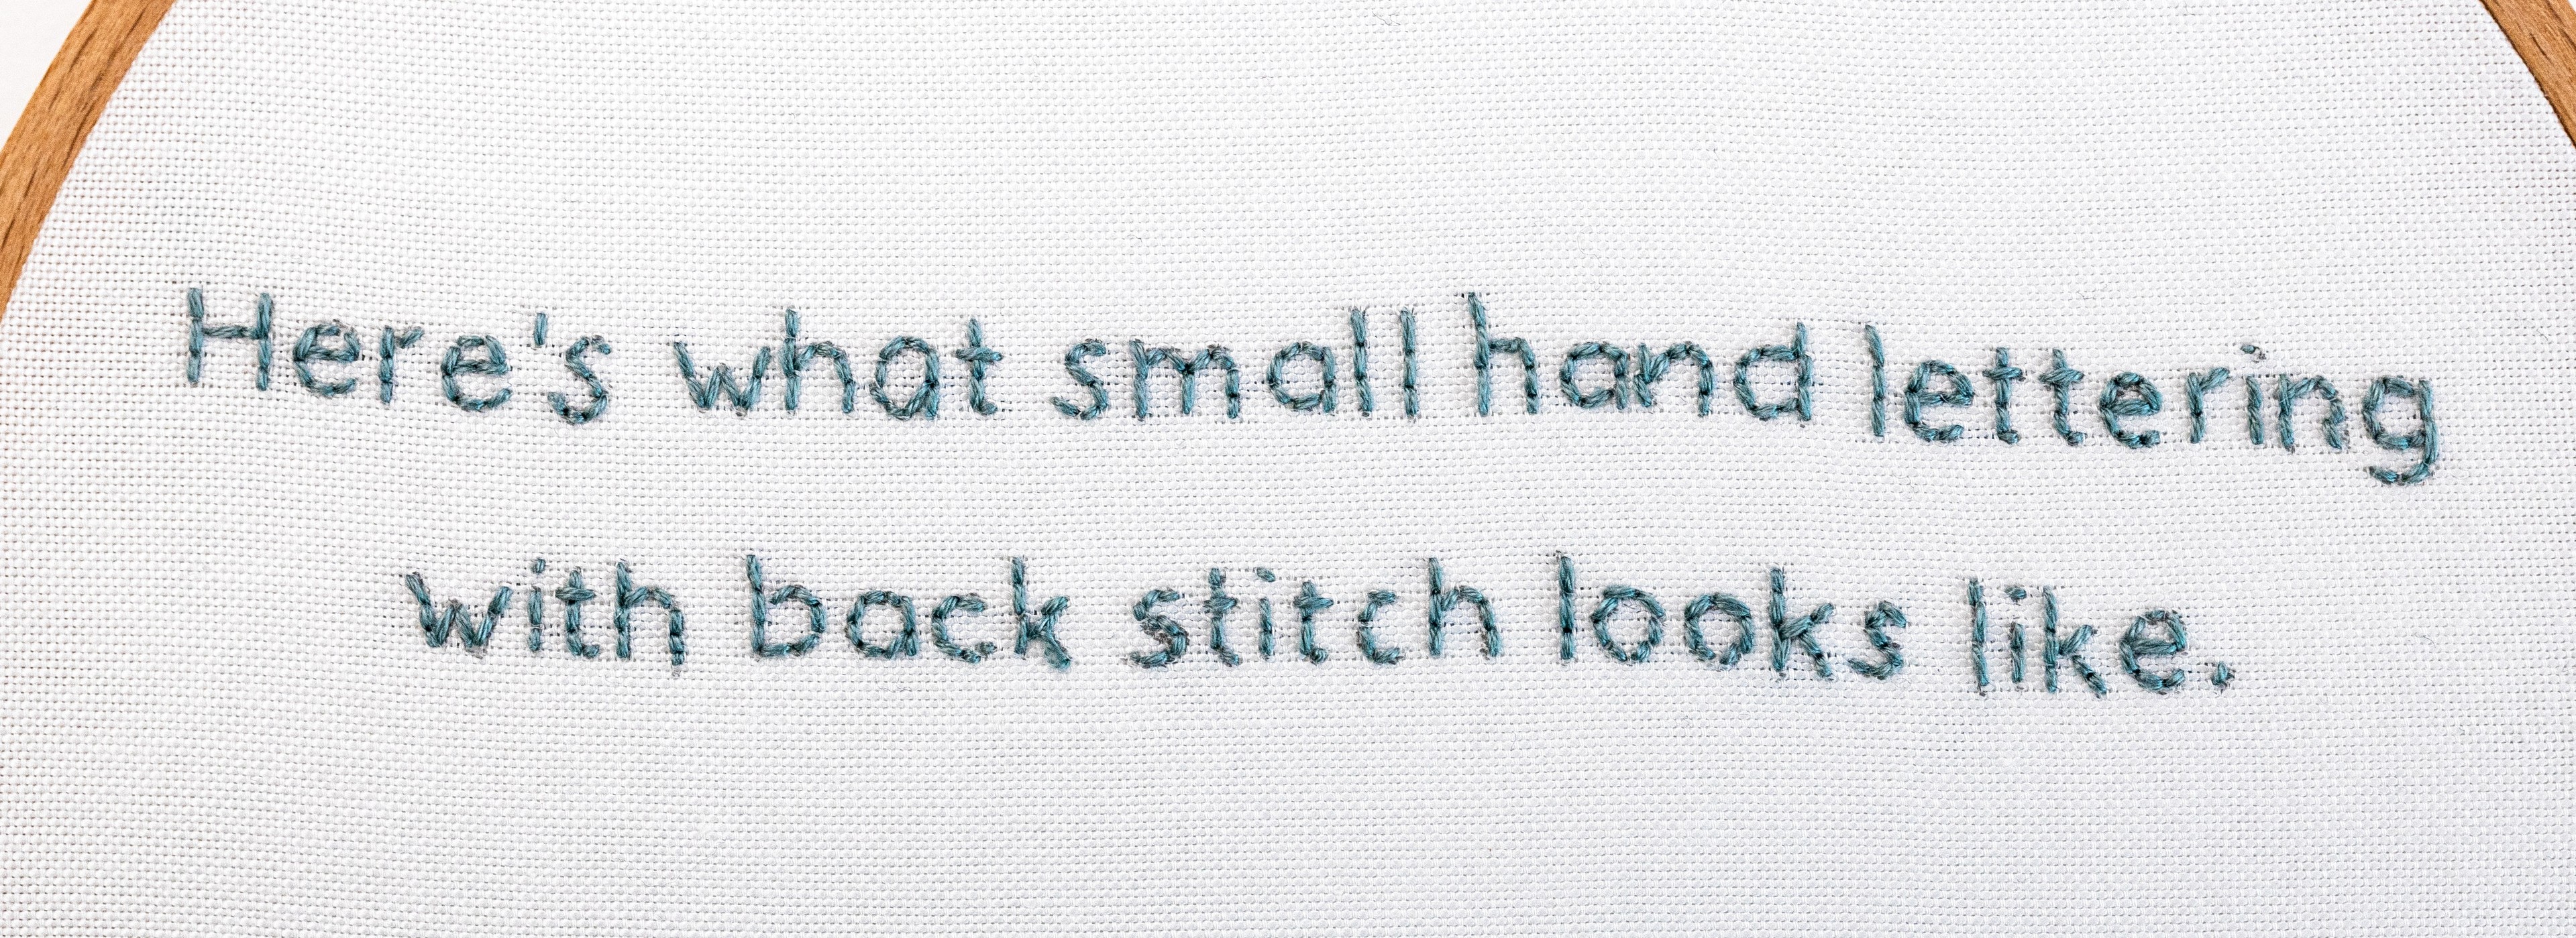 This is a sentence stitched with modern embroidery using back stitch.